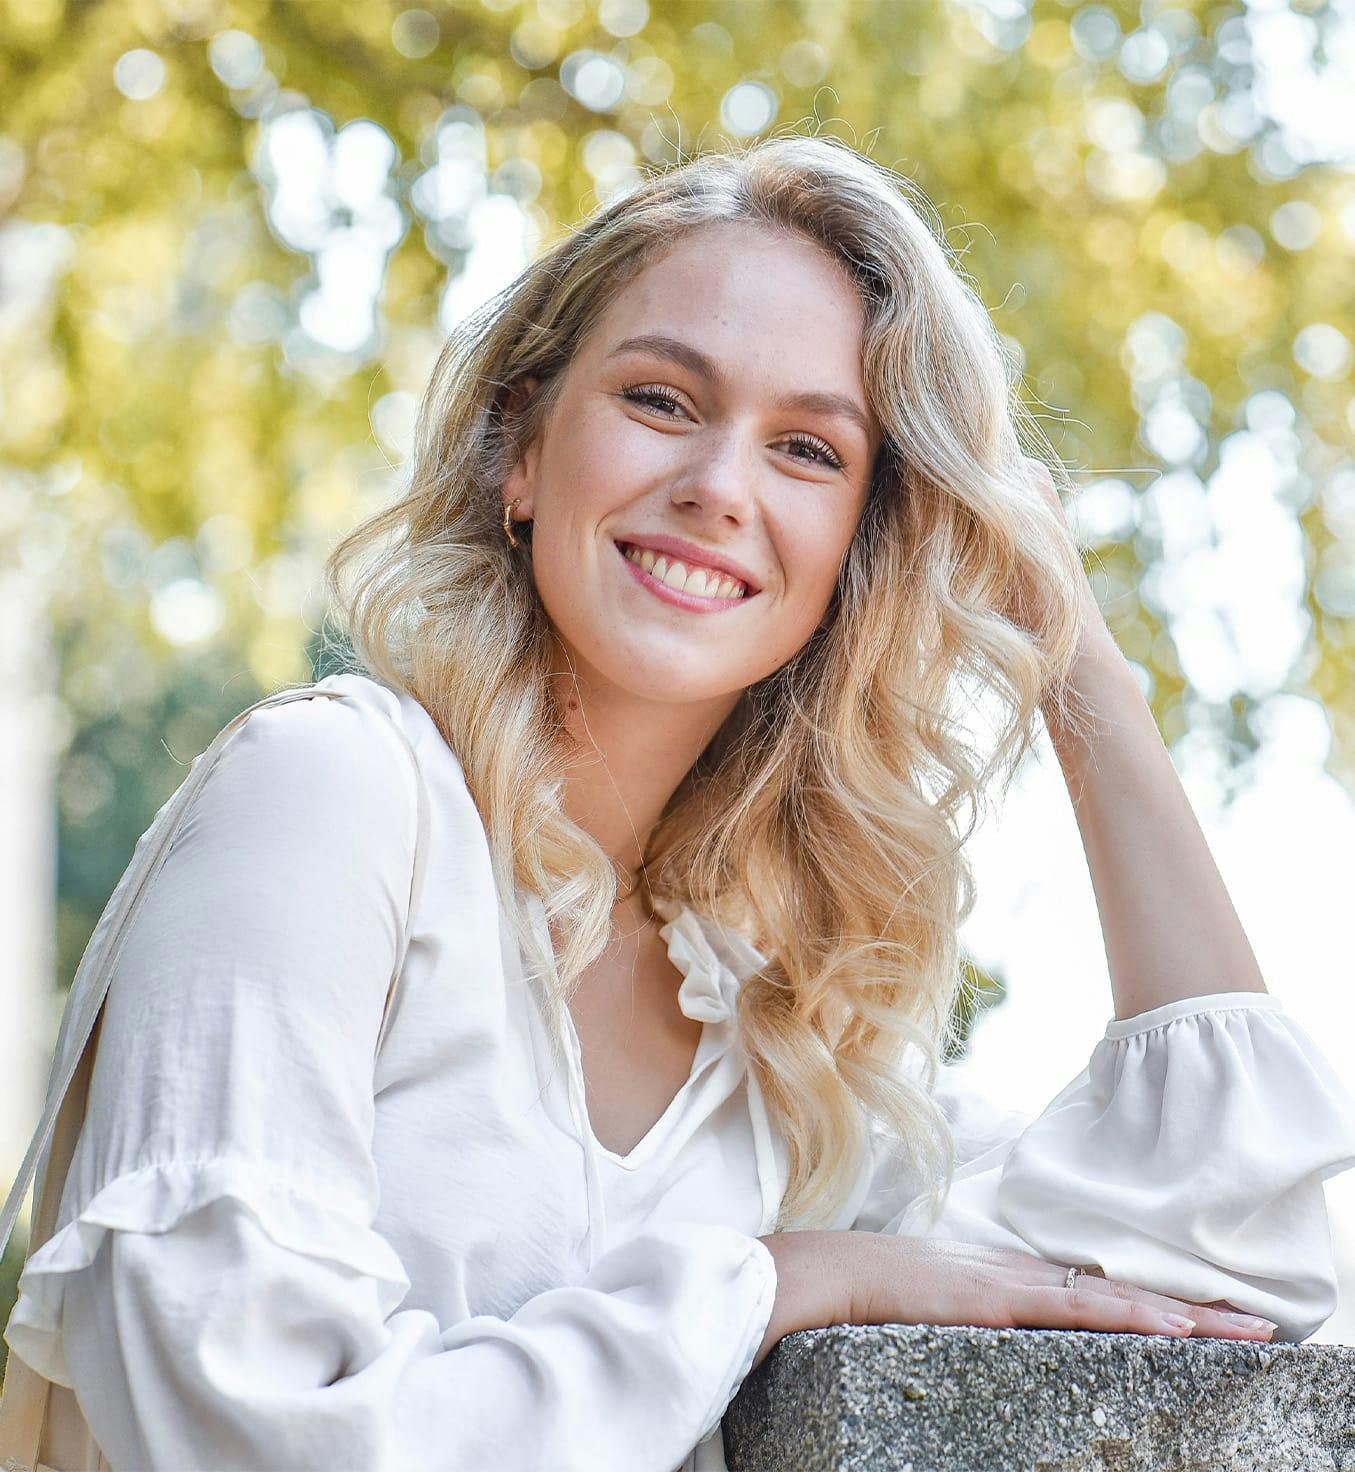 Woman with blonde hair smiling